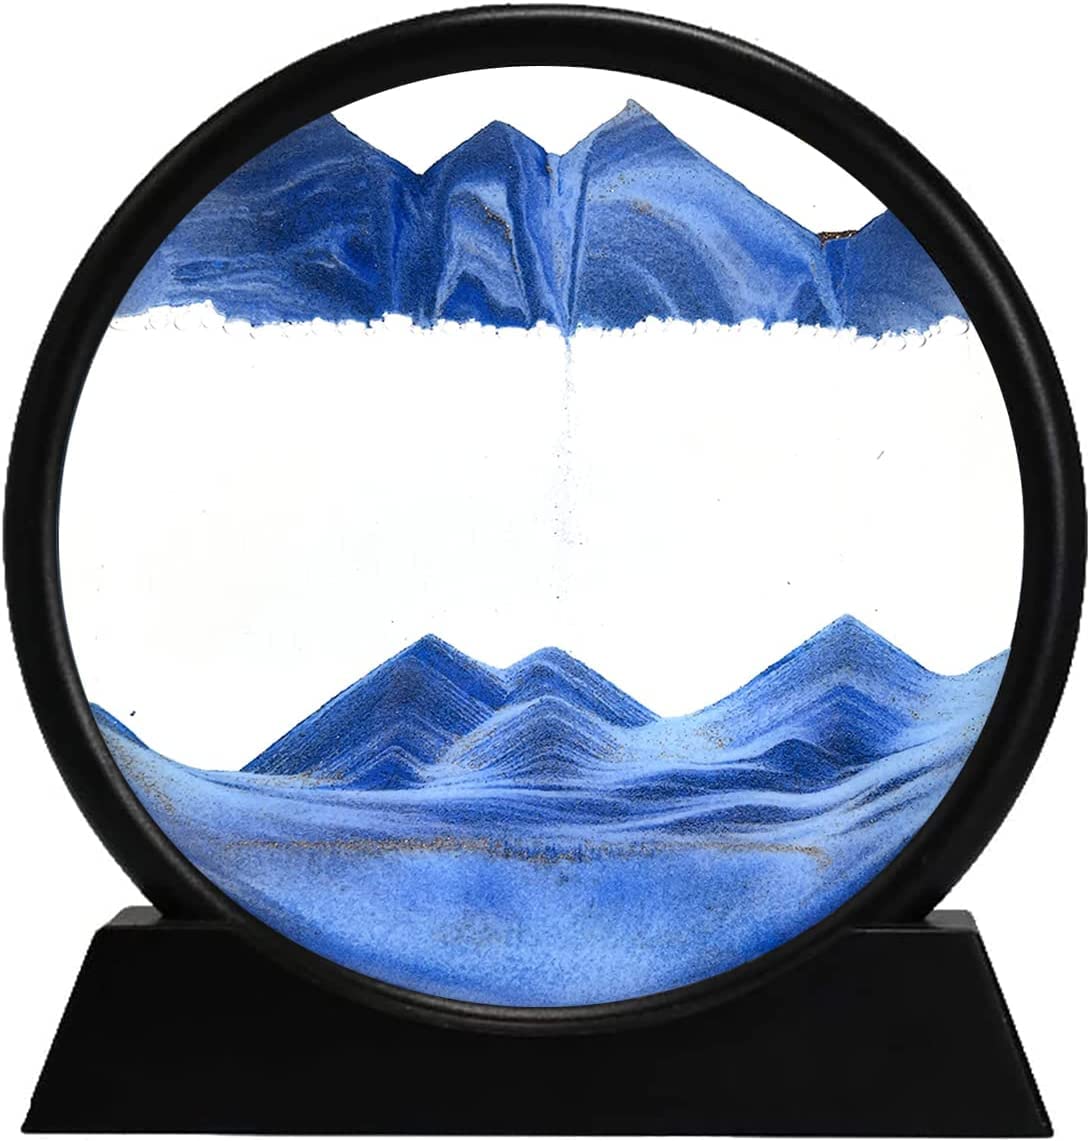 STAR WORK Moving Sand Art Picture Round Glass 3D Deep Sea Sand scape in Motion Display Flowing Sand Frame Relaxing Desktop Home Office Work Decor Black Frame (12 IN,7 IN, BLUE)